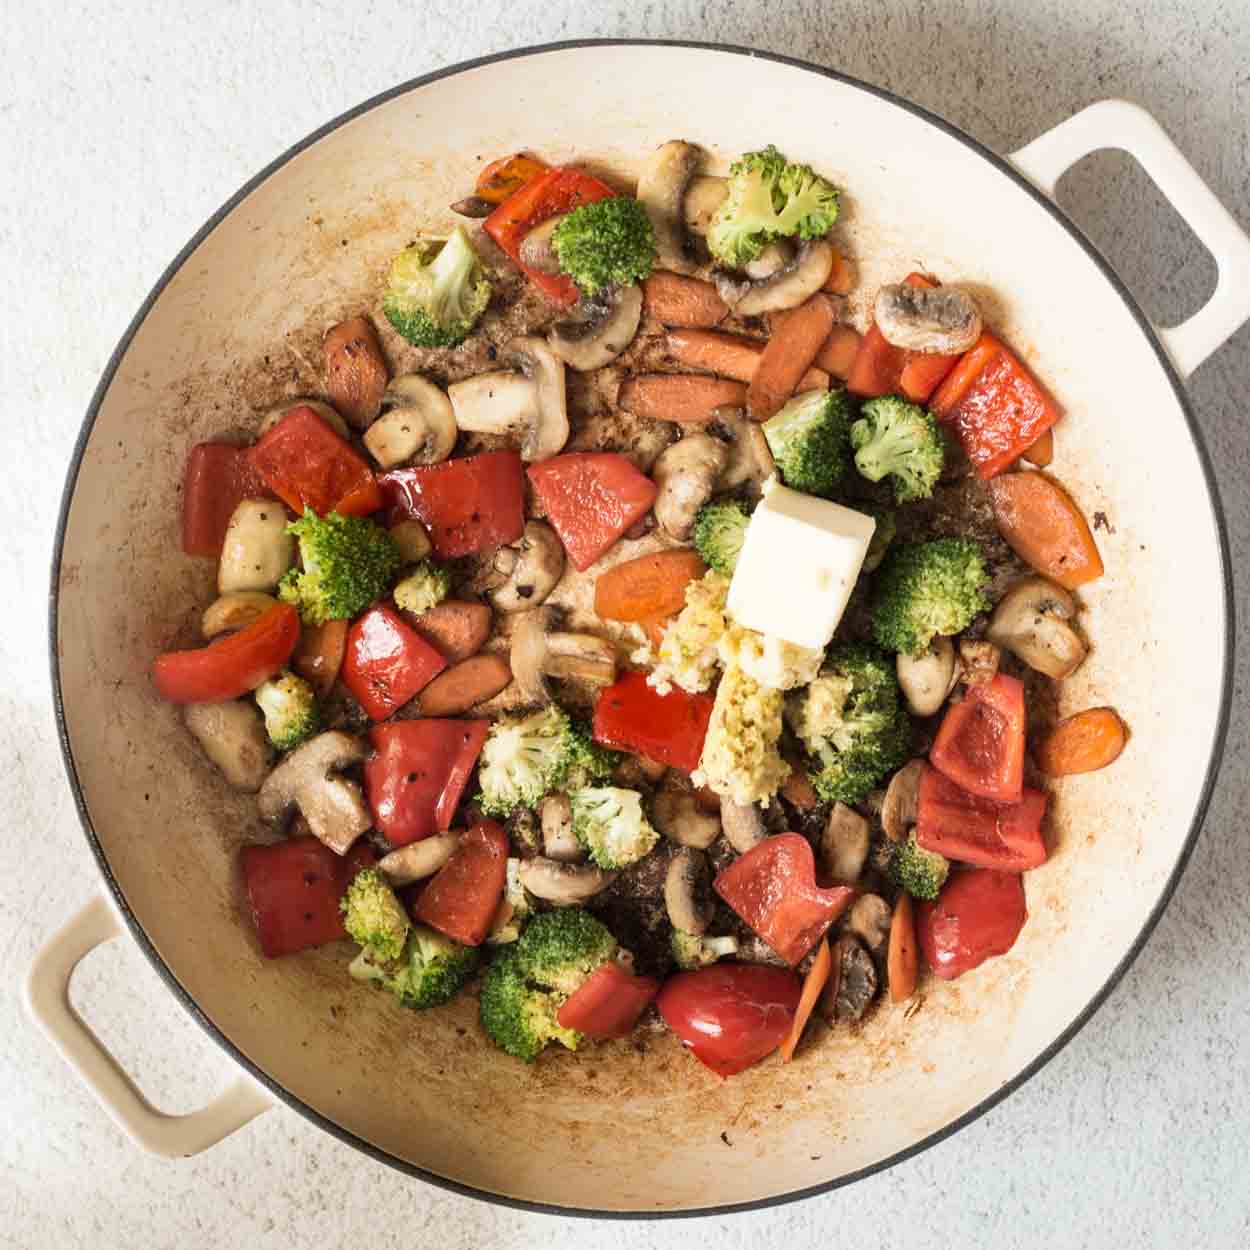 The skillet full of vegetables, with added butter. 